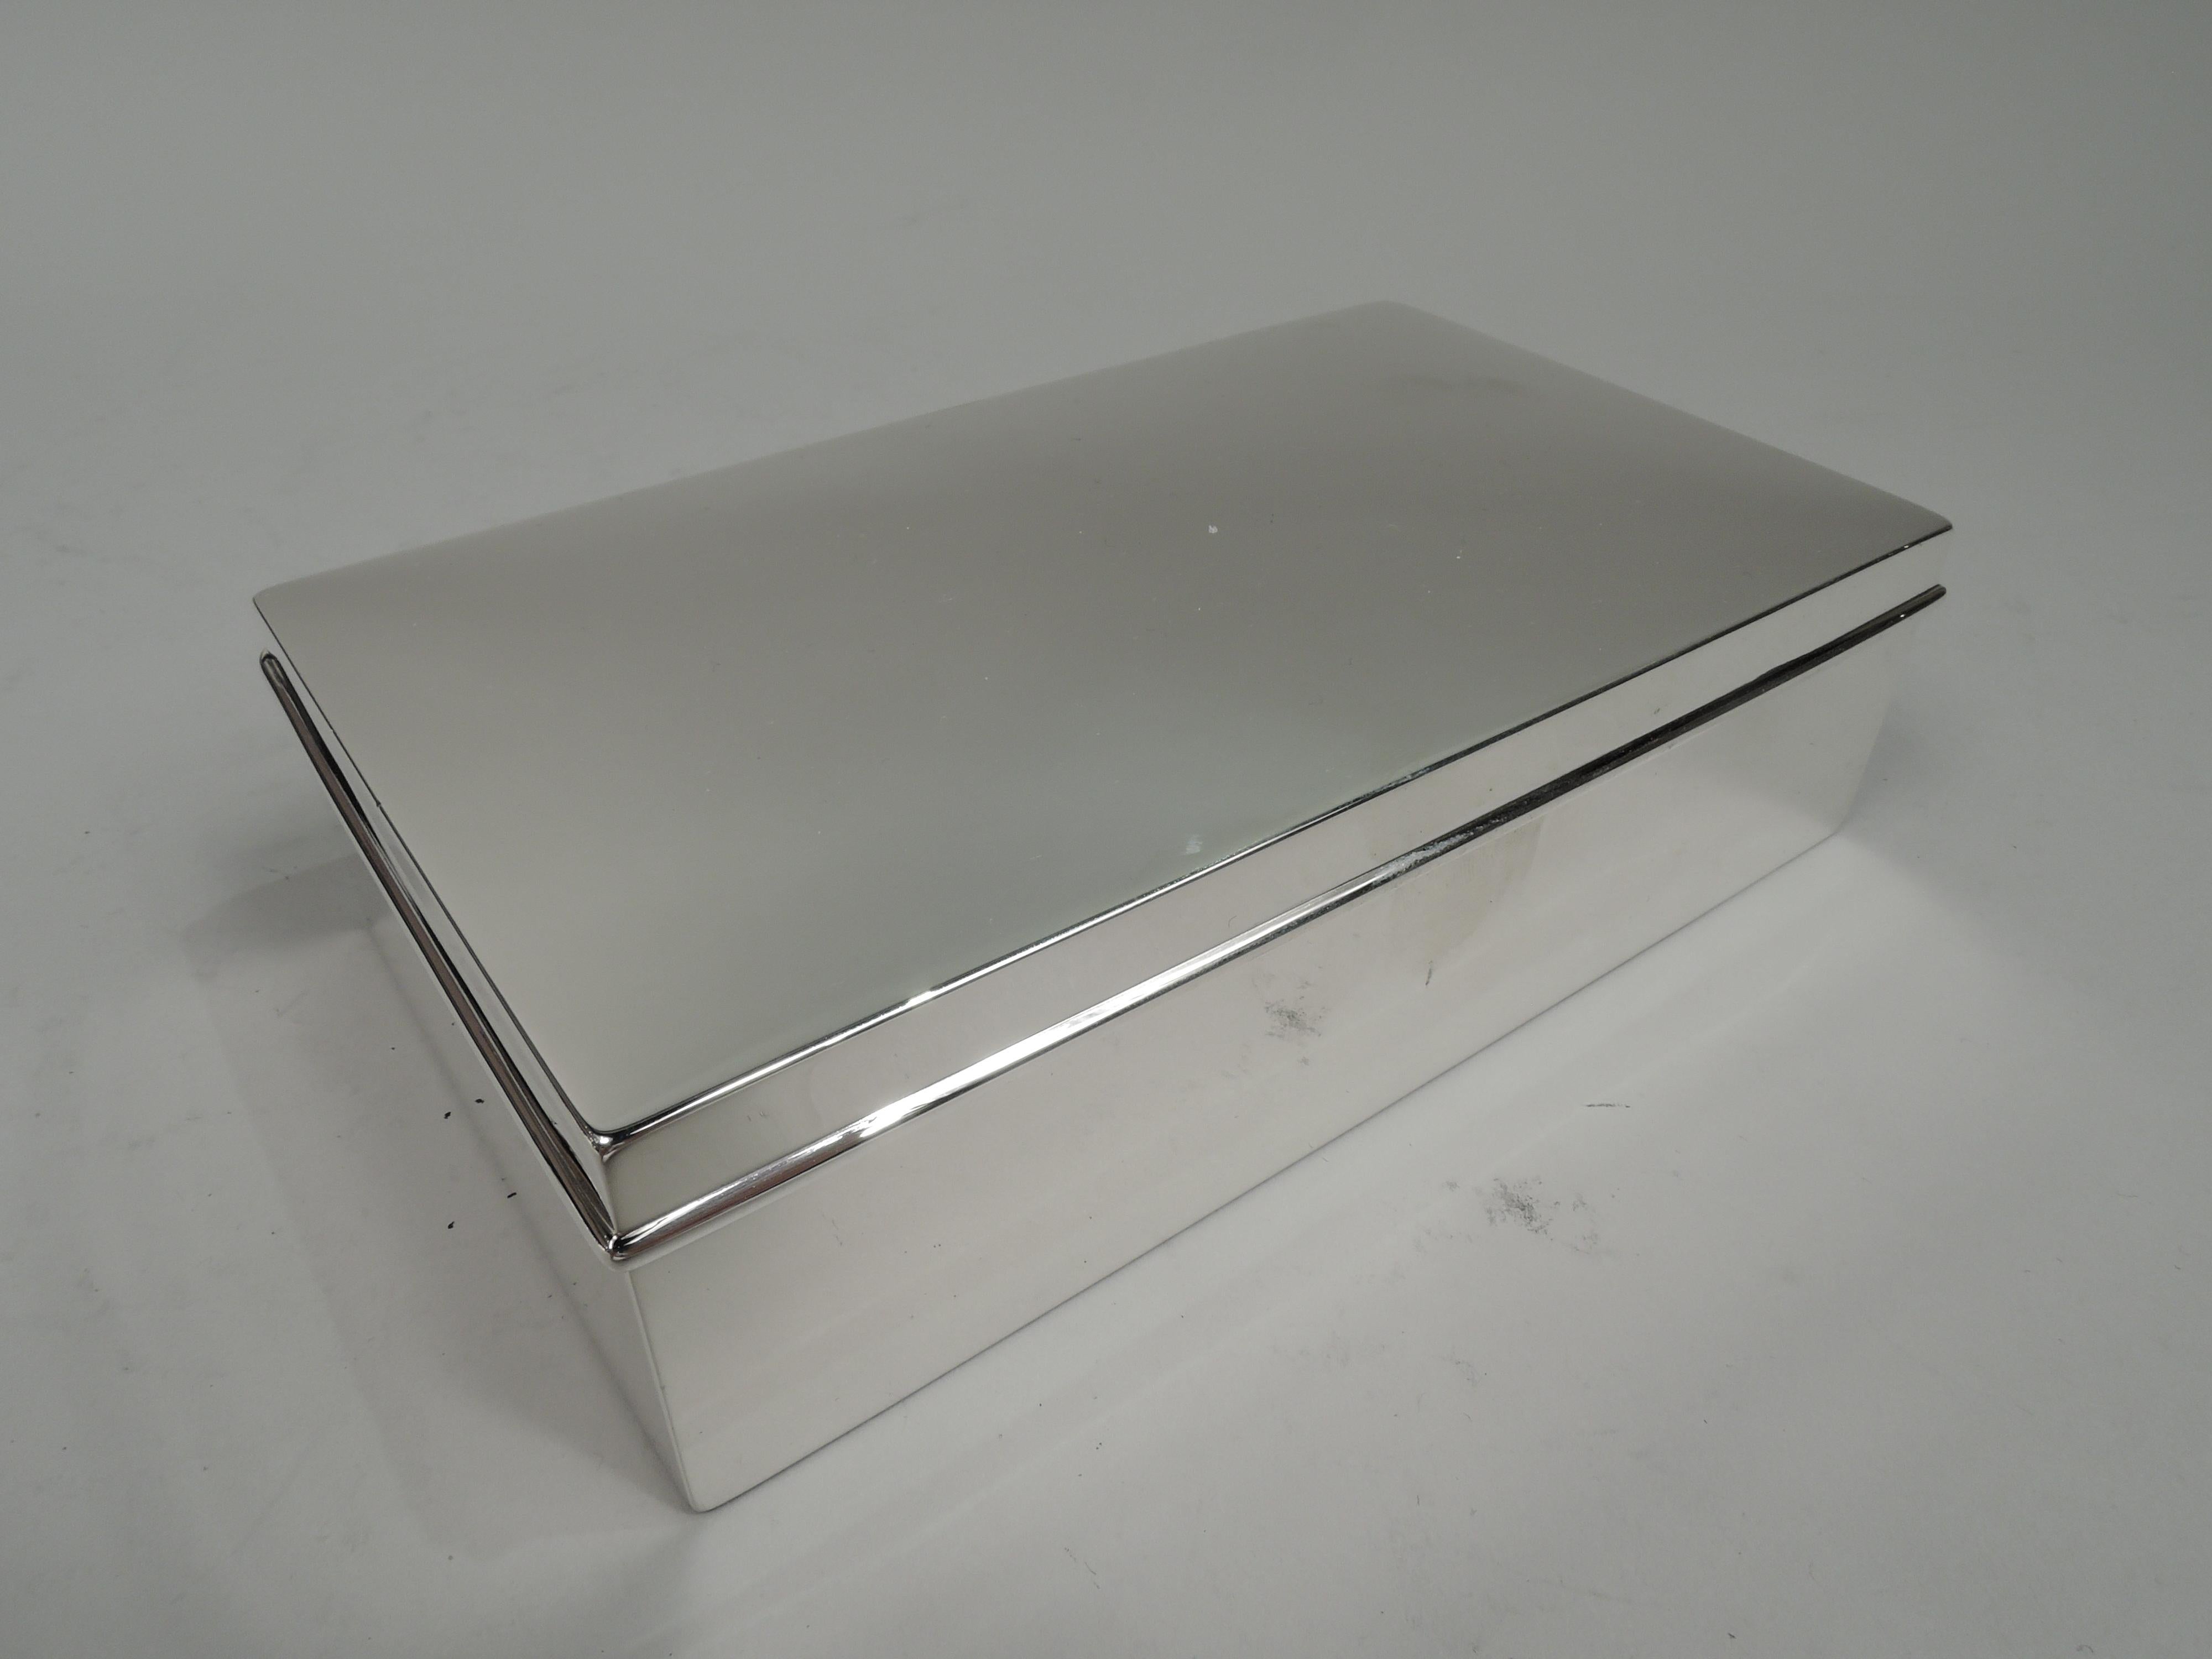 Modern sterling silver box. Made by Tiffany & Co. in New York, ca 1919. Rectangular with straight sides. Cover hinged with gently curved top and overhanging rim. Box interior cedar lined. Cover interior gilt washed. Fully marked including maker’s